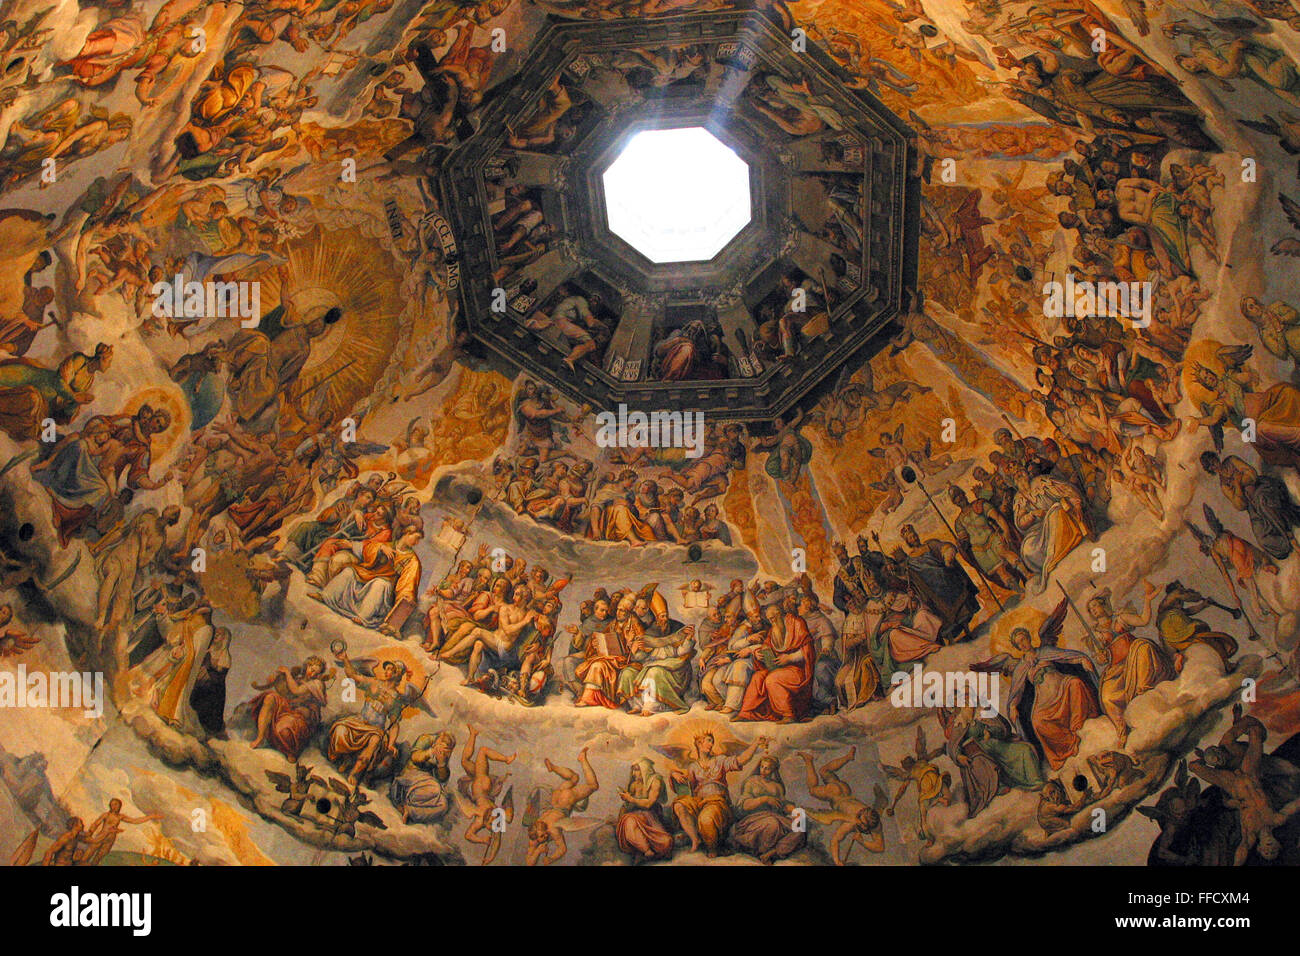 The painted ceiling on the dome of Piazza del Duomo, Florence, Italy. The cathedral was built at the end of the 13th century by Filippo Brunelleschi and then the dome was added in the 15th century. Stock Photo